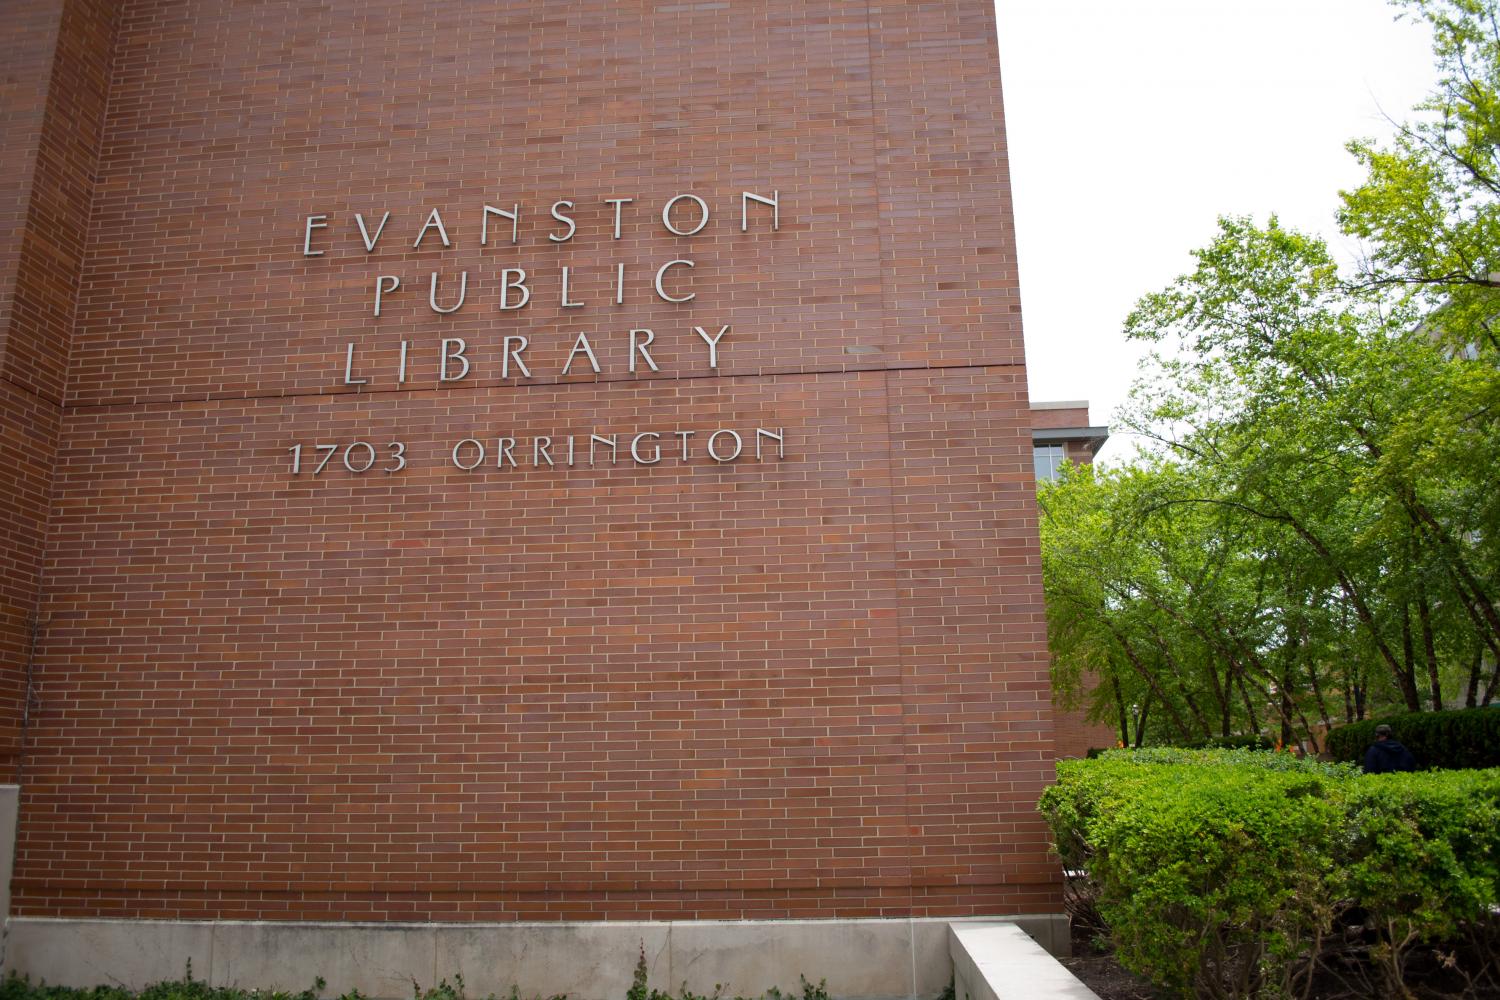 Evanston Public Library. The librarys board continued its equity discussion Wednesday.